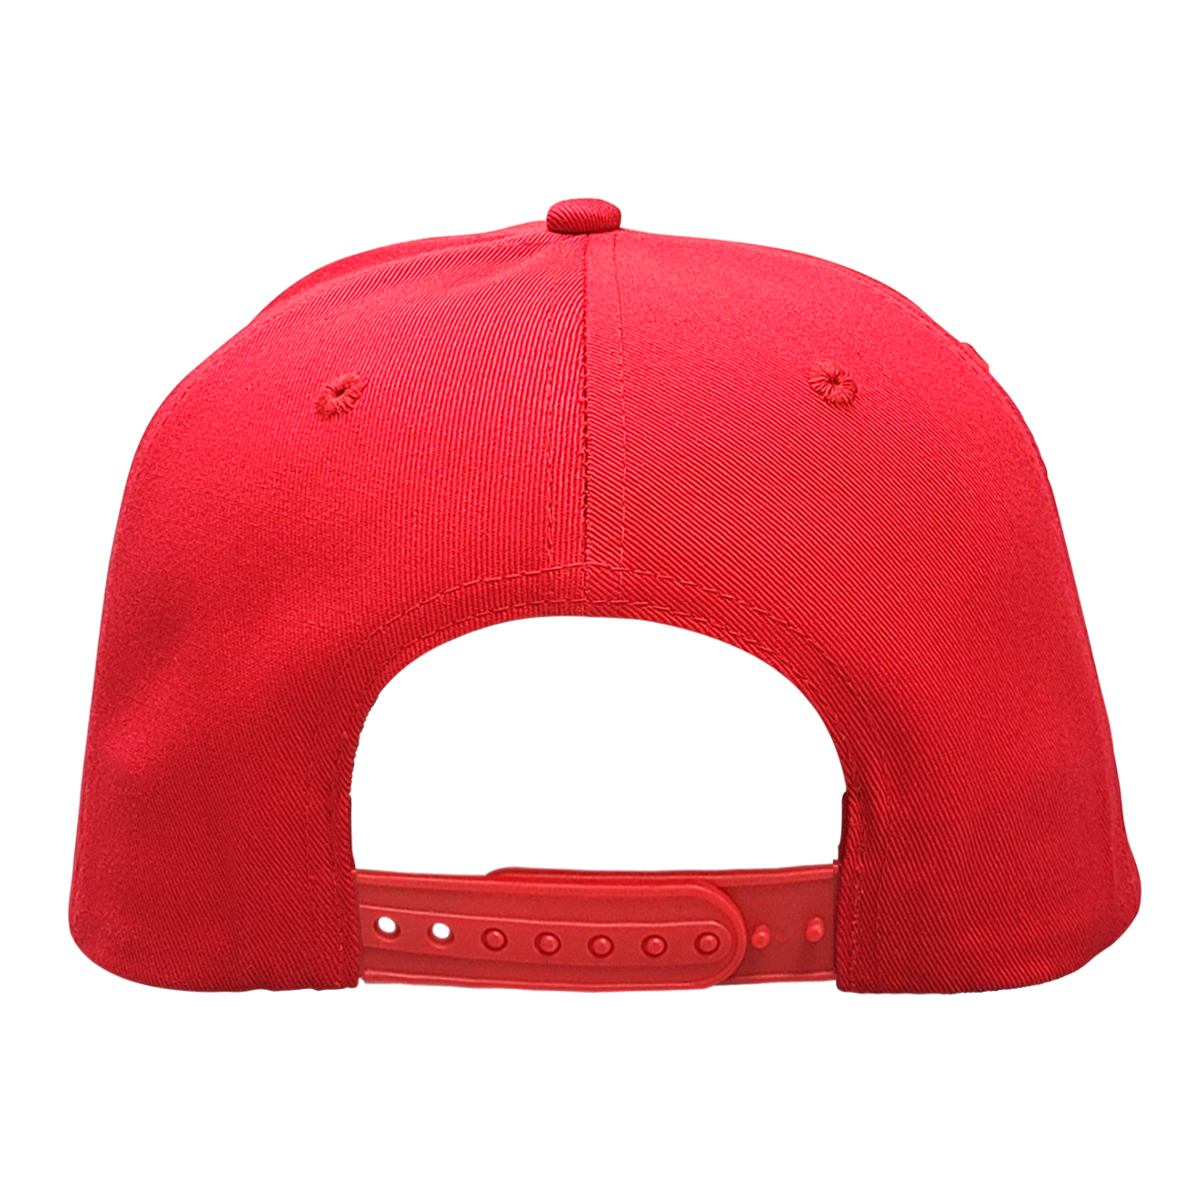 Cotton Twill Snap Back - 9210